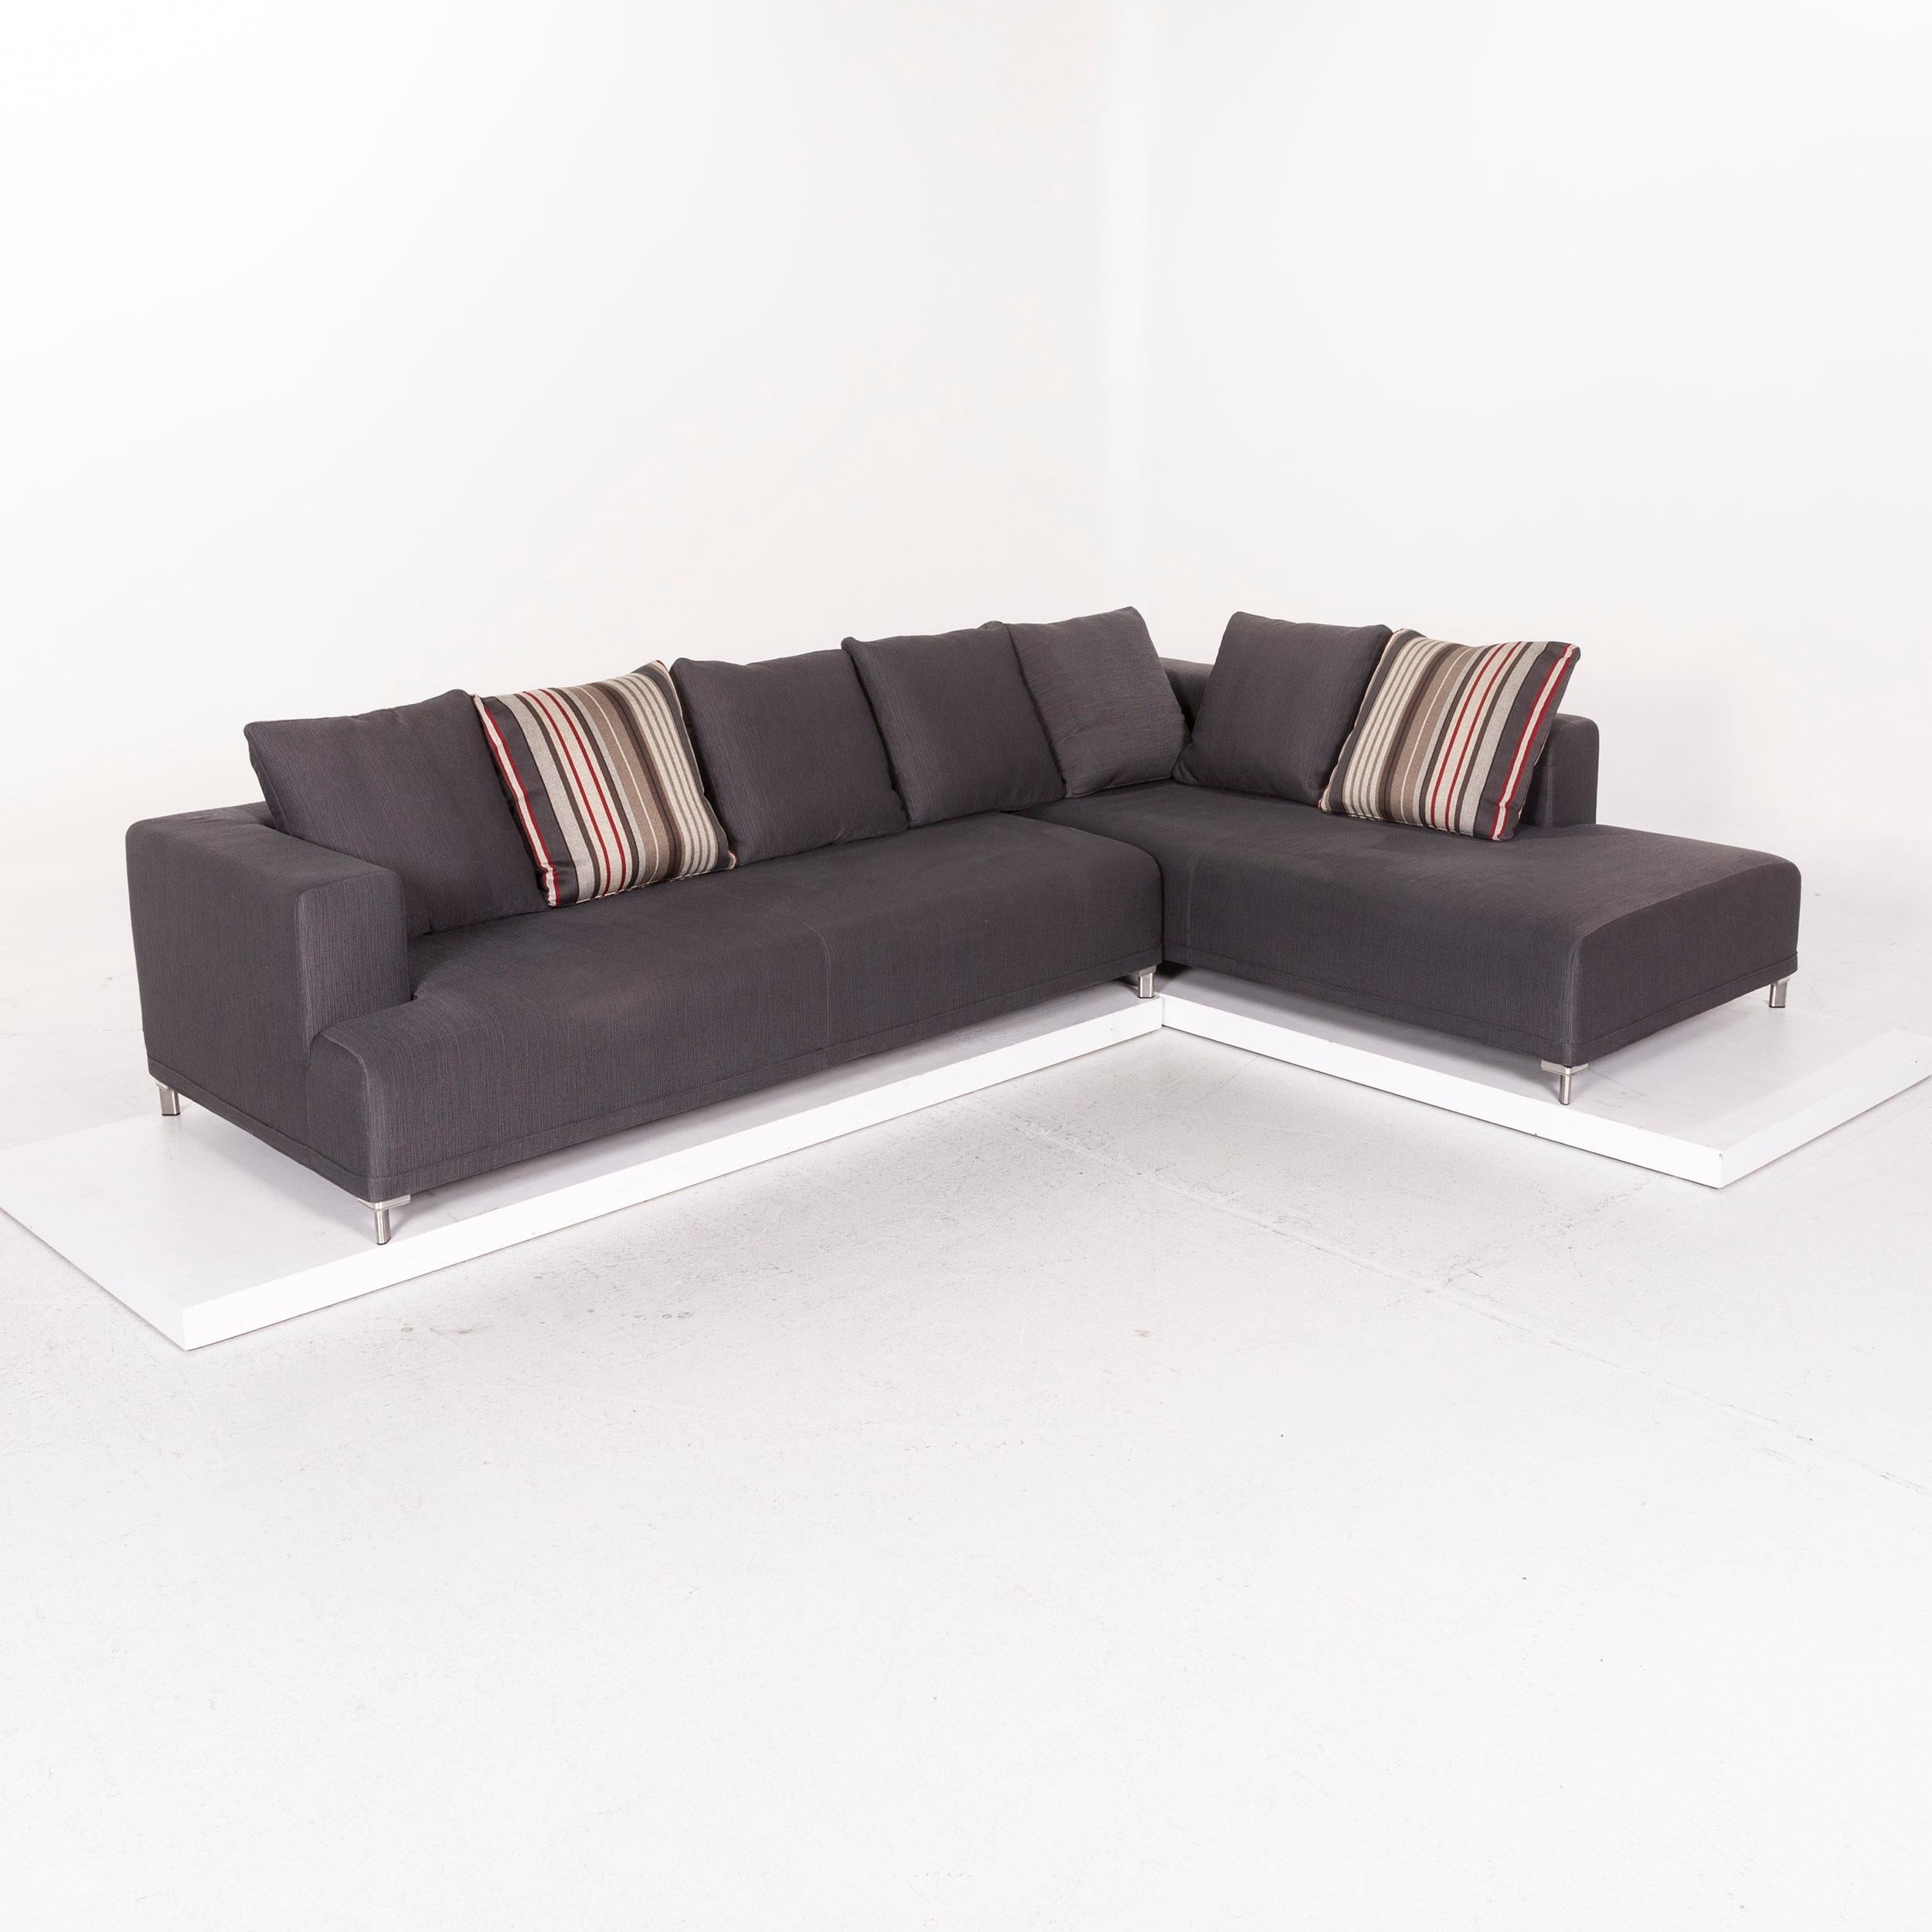 We bring to you a ligne roset opium fabric corner sofa anthracite gray sofa couch.
   
 

 Product measurements in centimeters:
 

Depth 101
Width 317
Height 83
Seat-height 41
Rest-height 66
Seat-depth 54
Seat-width 243
Back-height 43.